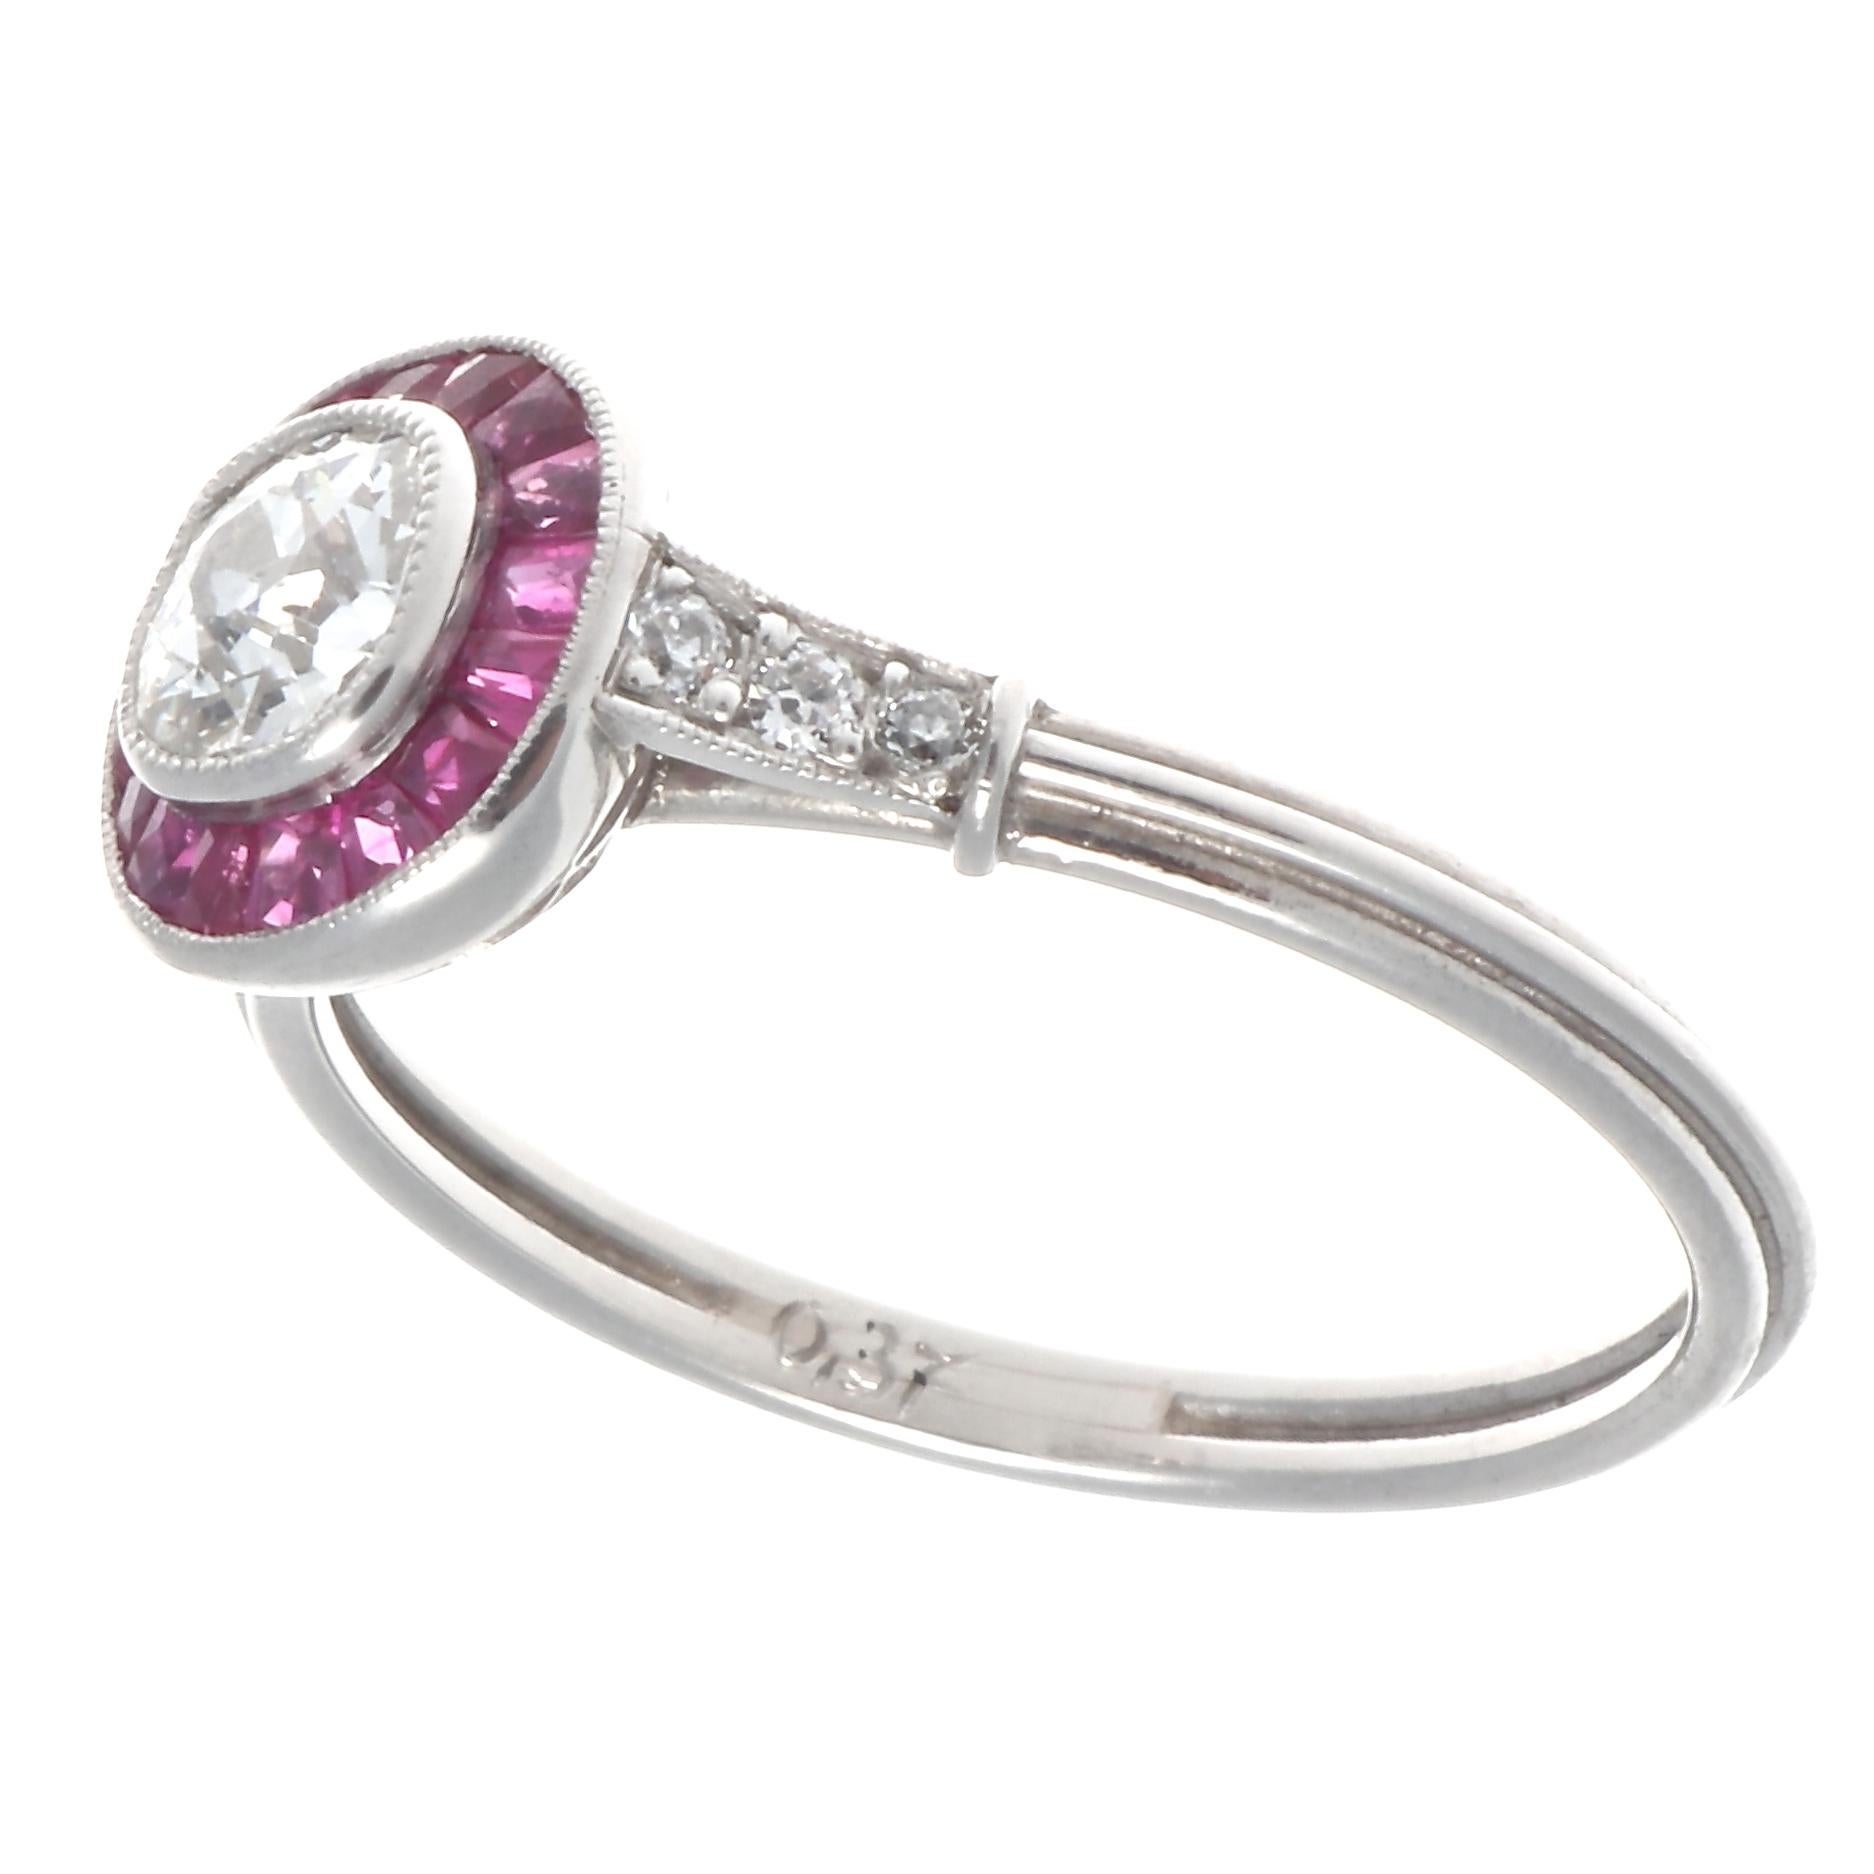 Art deco inspired 0.37 carat old European cut diamond, graded G-H color, VS clarity. With 16 French cut rubies that weigh approximately 0.50 carats, and 6 old European cut diamonds graded H-I color, SI clarity. Crafted in platinum. Size 6 1/2 and